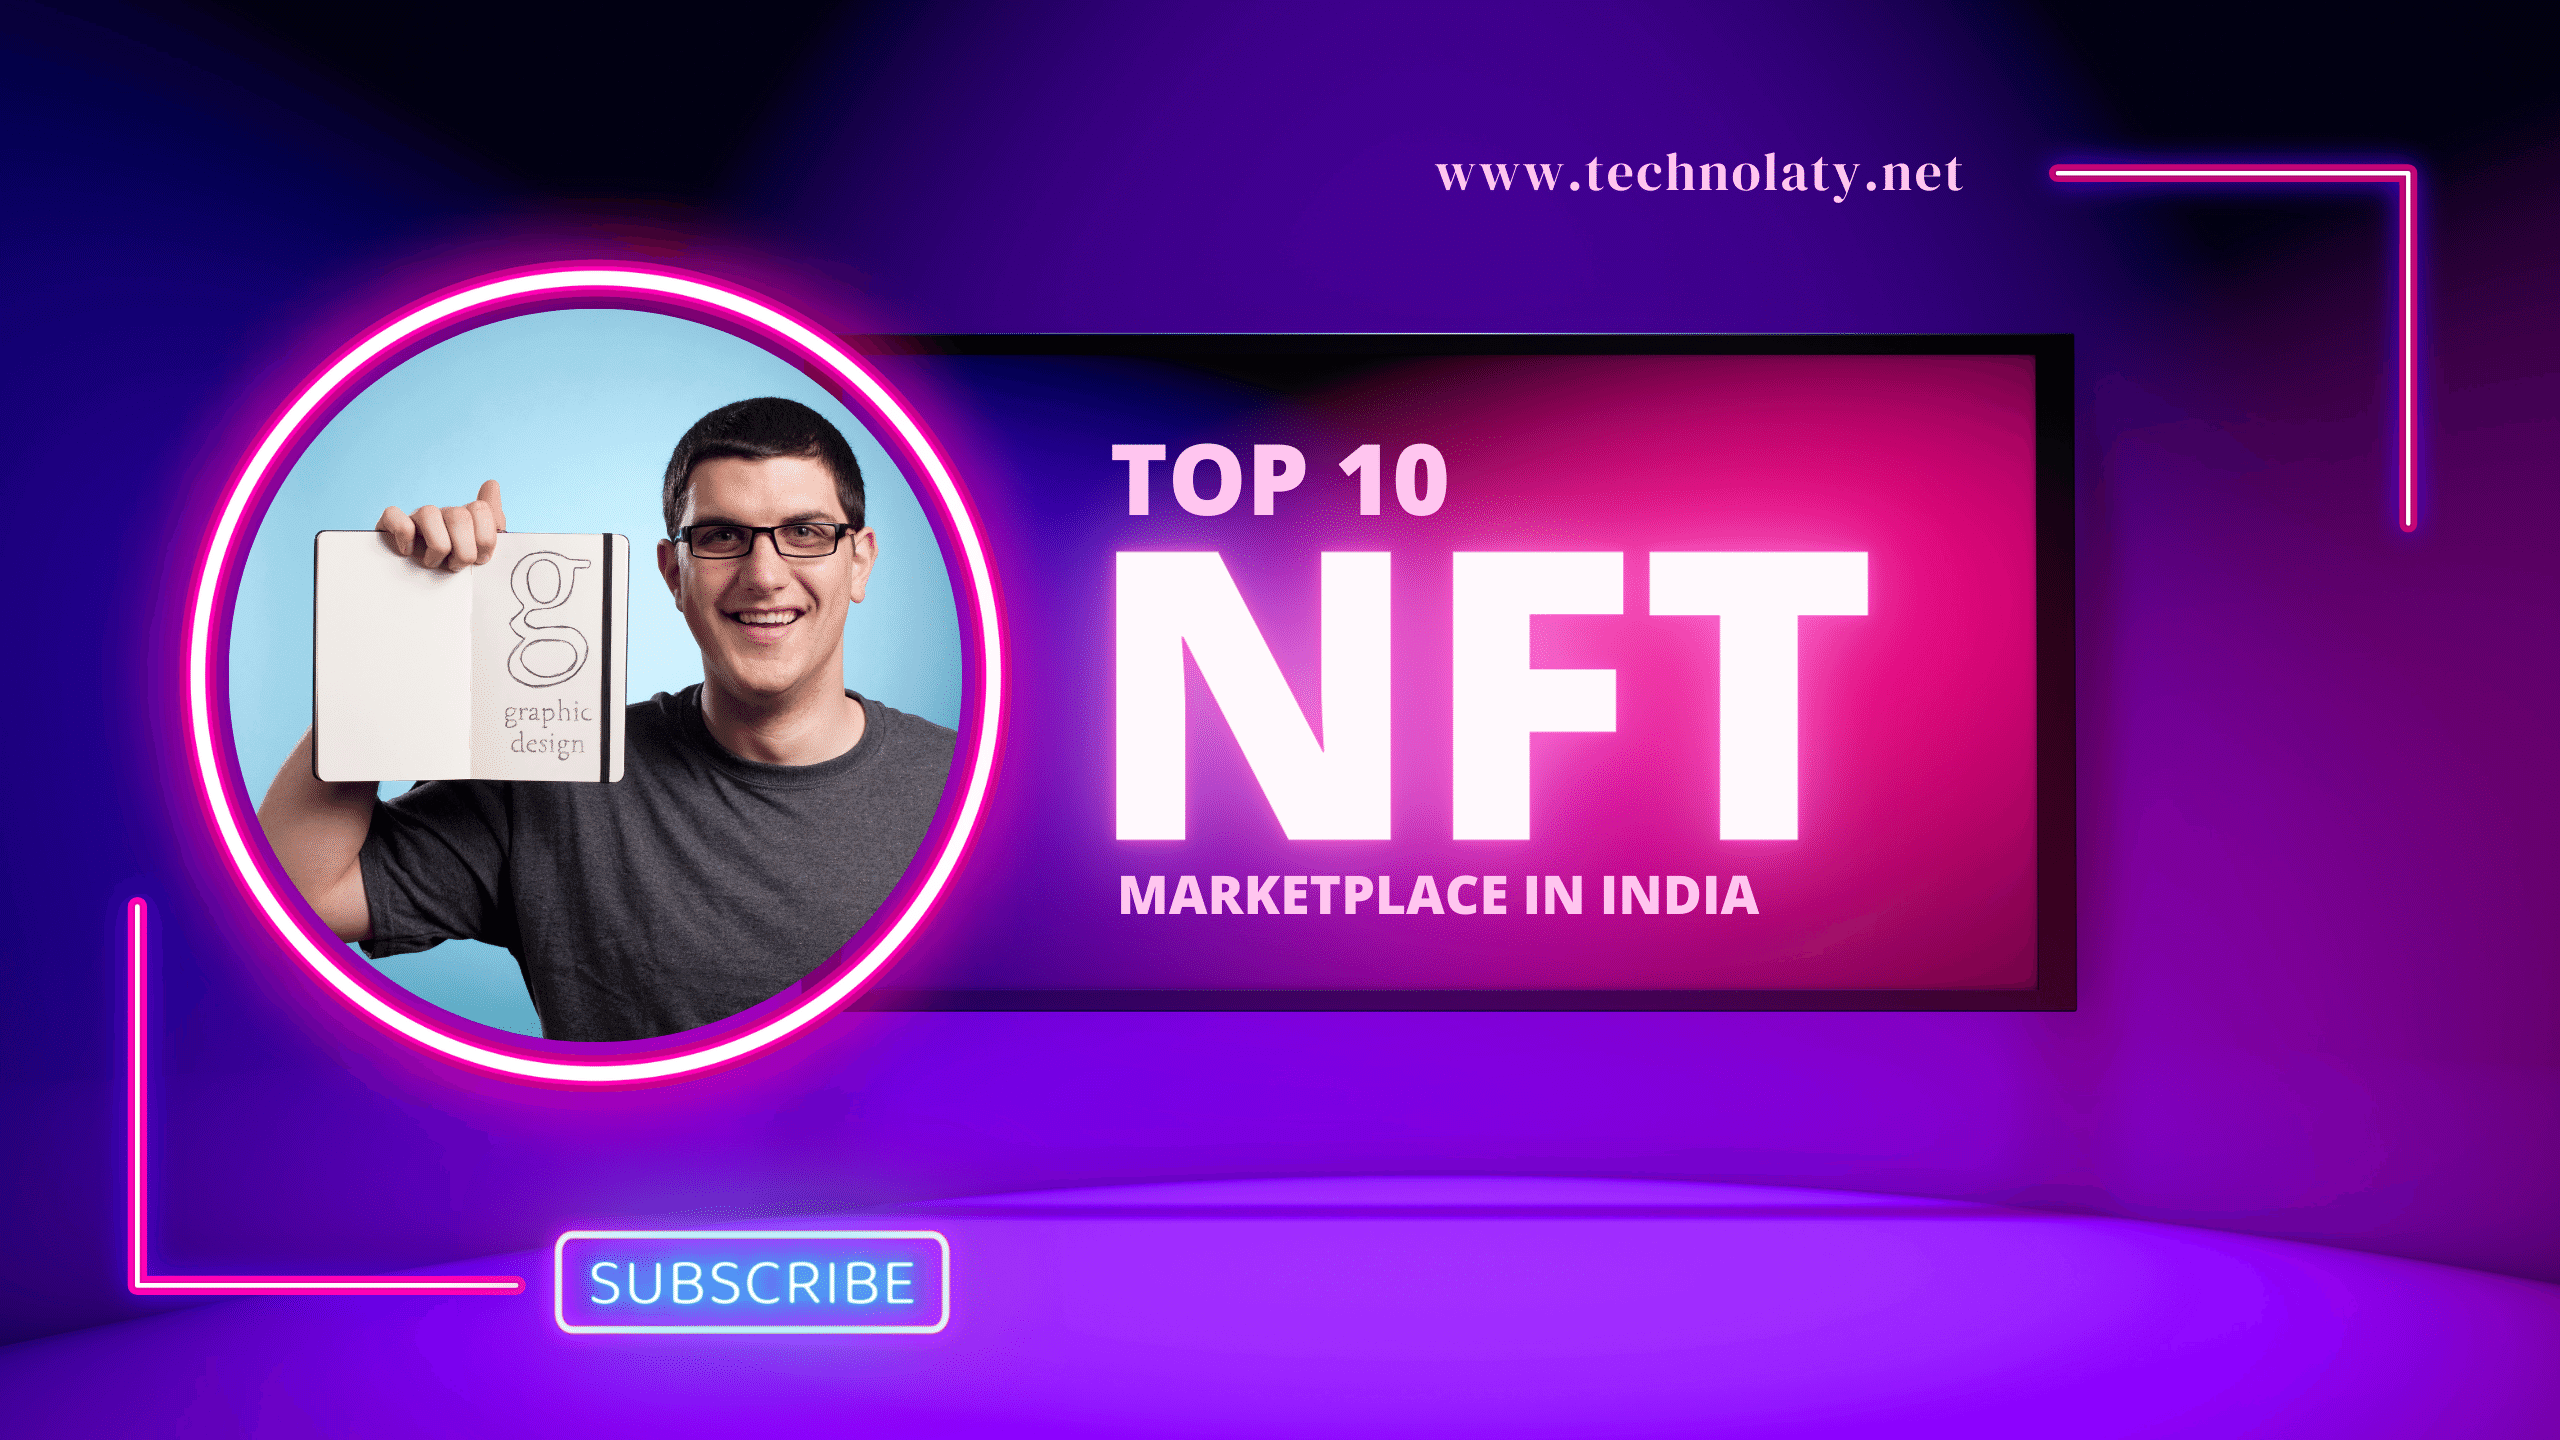 Best Marketplace for NFT in India